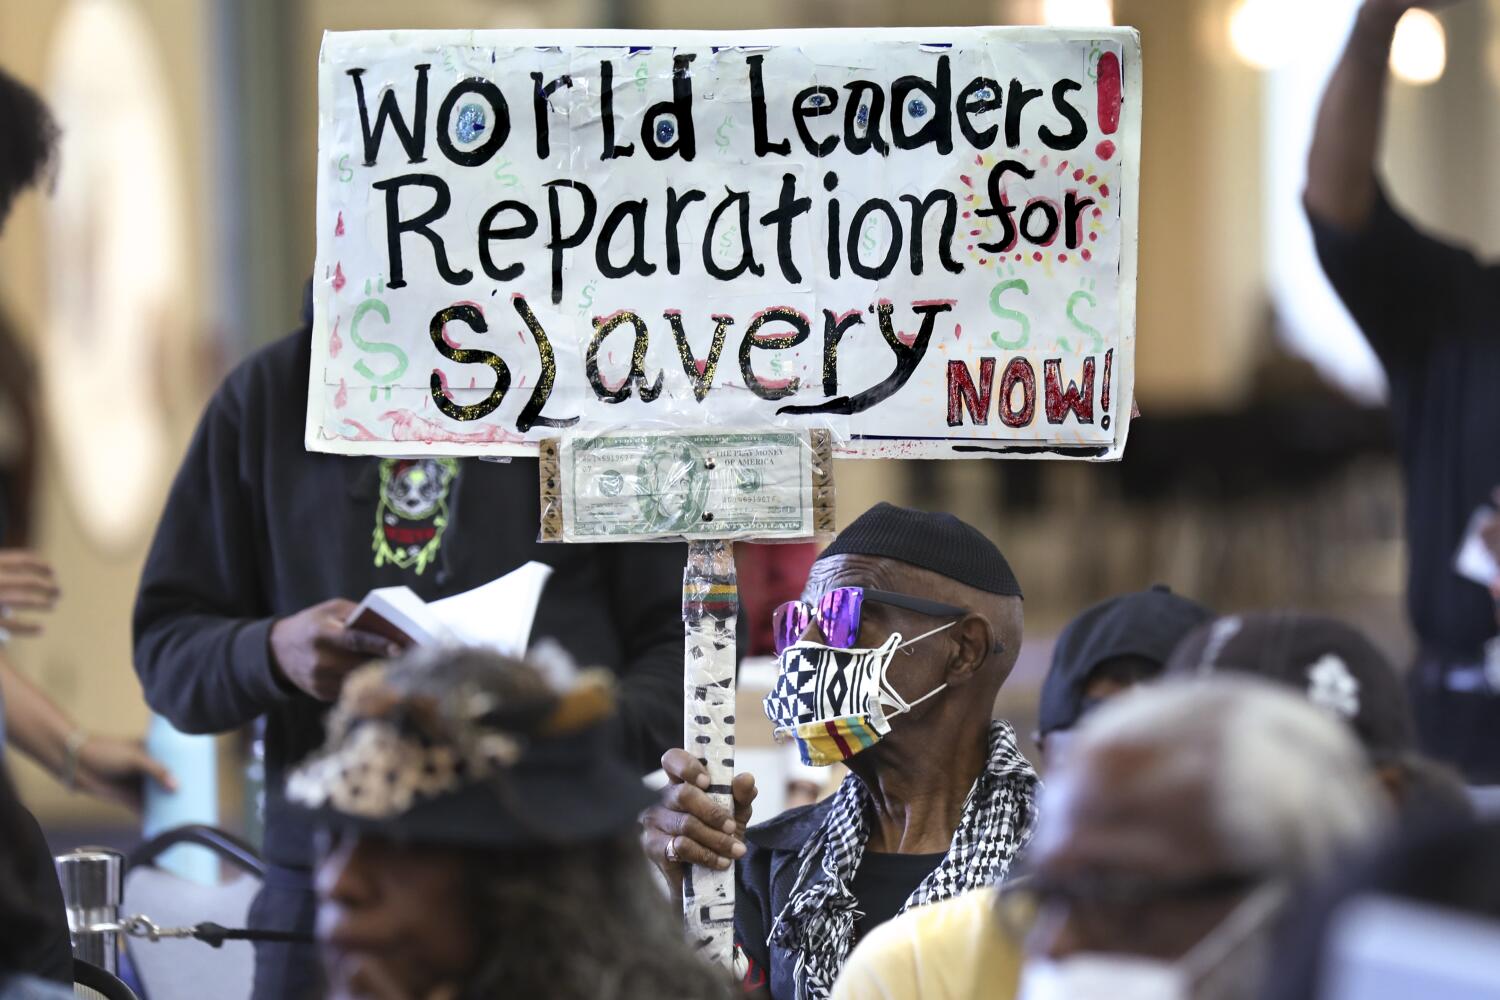 Most Californians want reparations for slavery but don't want to pay cash. Now what?